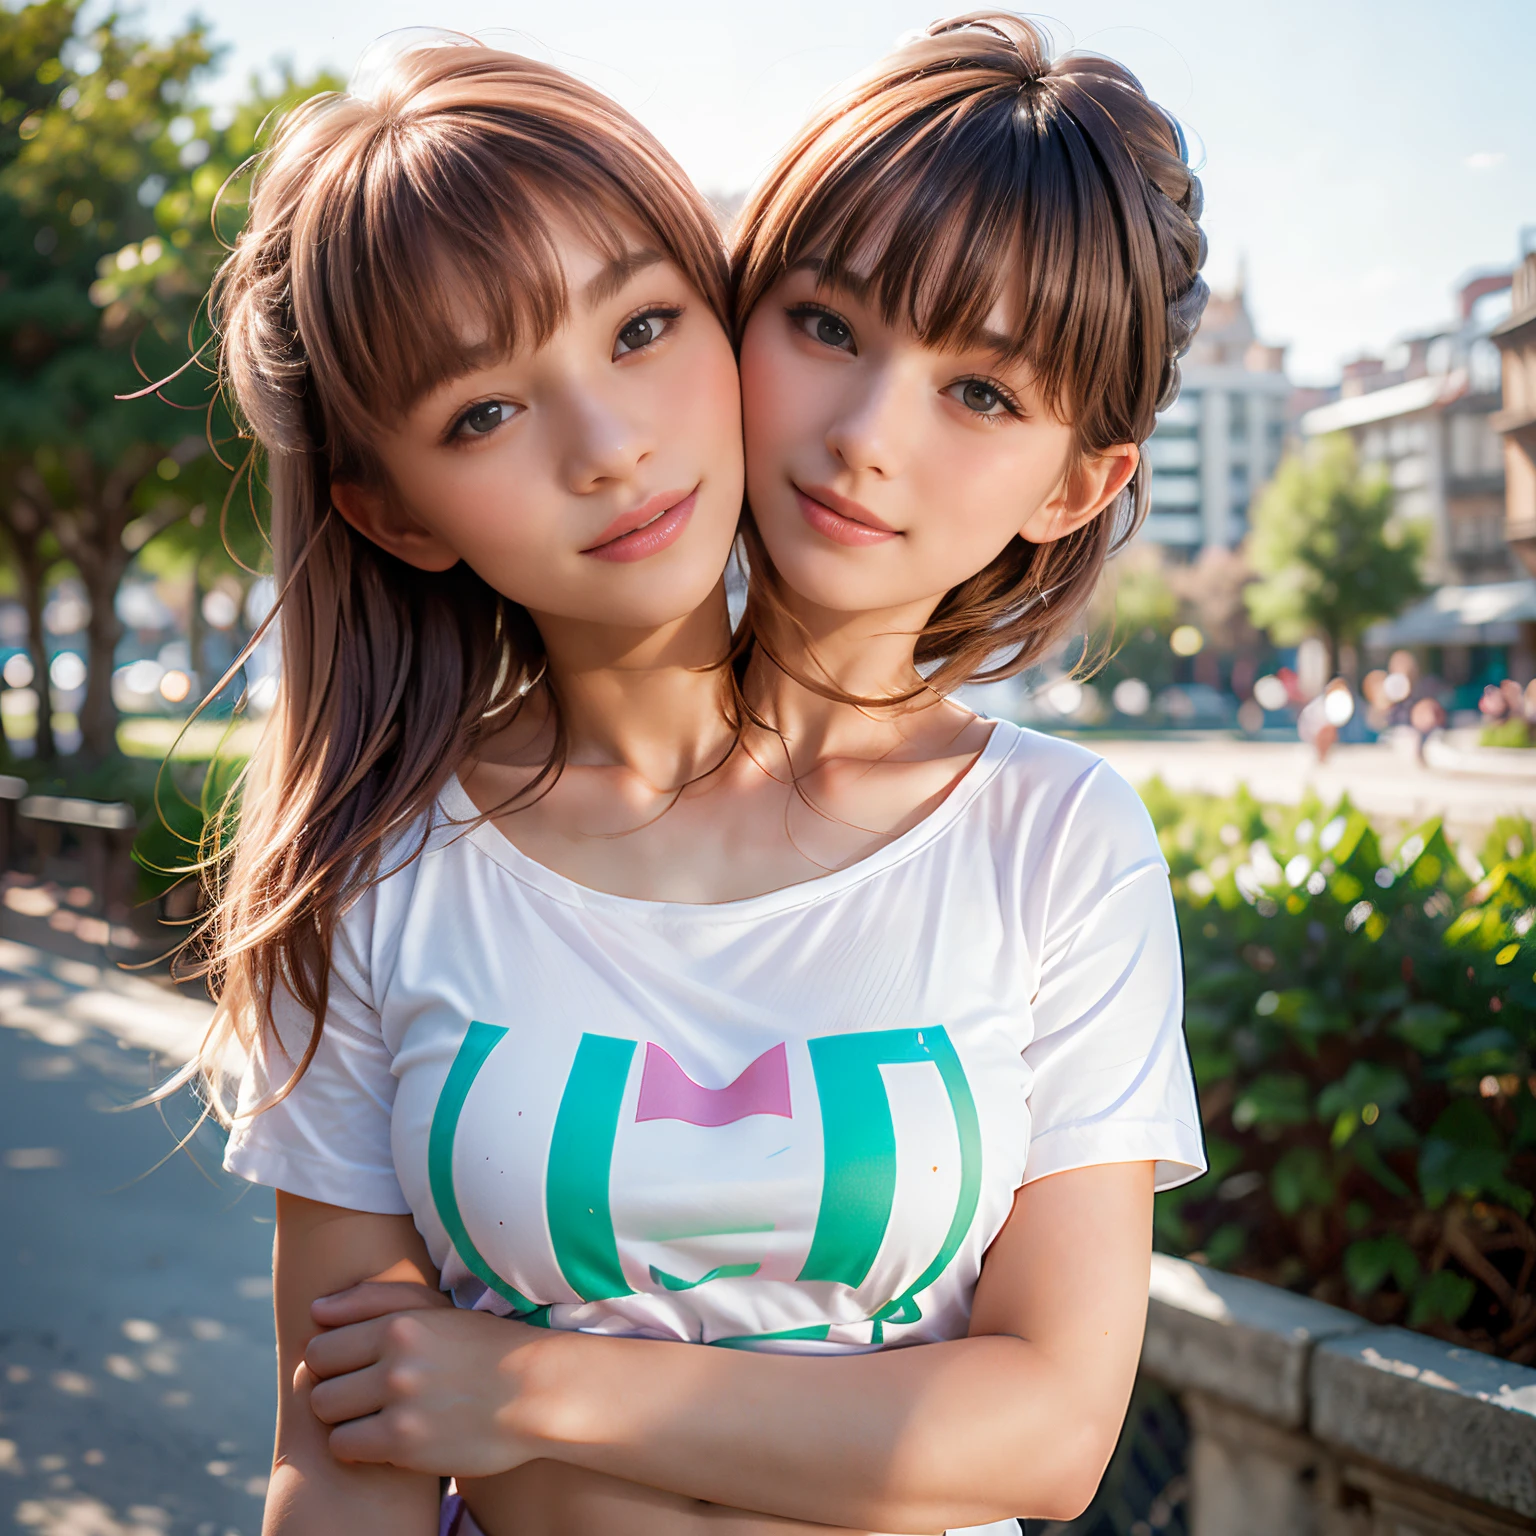 (best quality, 2heads, european girl with two head kissing girl on cheek, different hair bangs, tied hair, half color t-shirt,park background,)